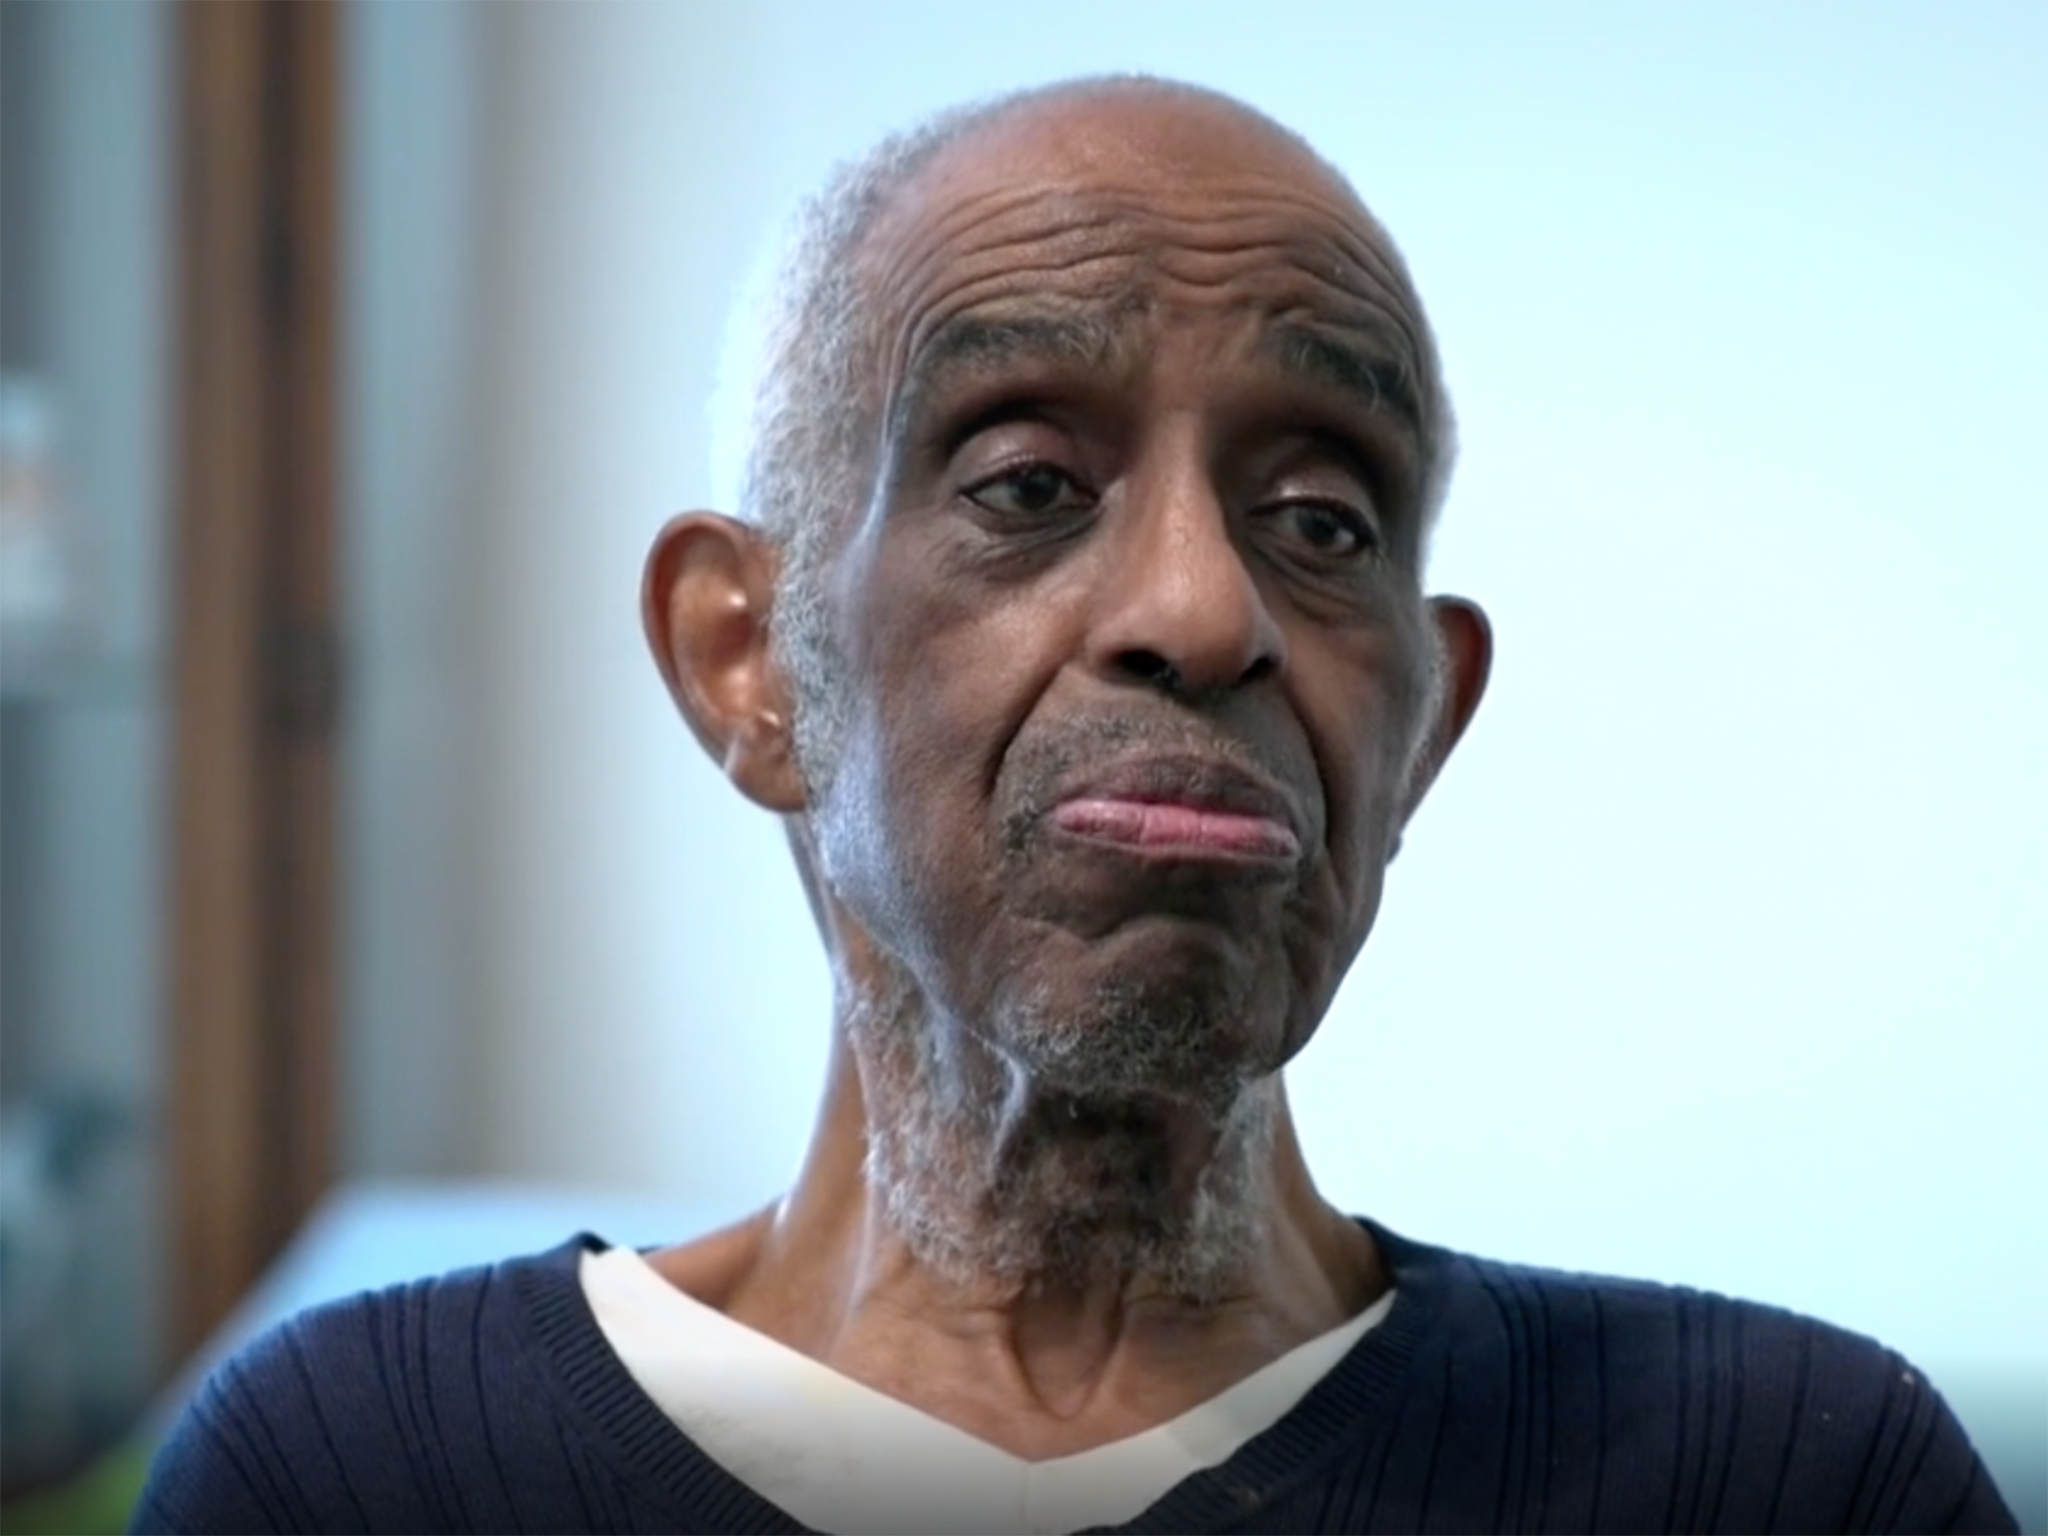 Louis Weathers is one of 16 people who received reparations last year. When he was born, his mother was not allowed to give birth in then-segregated Evanston’s only hospital